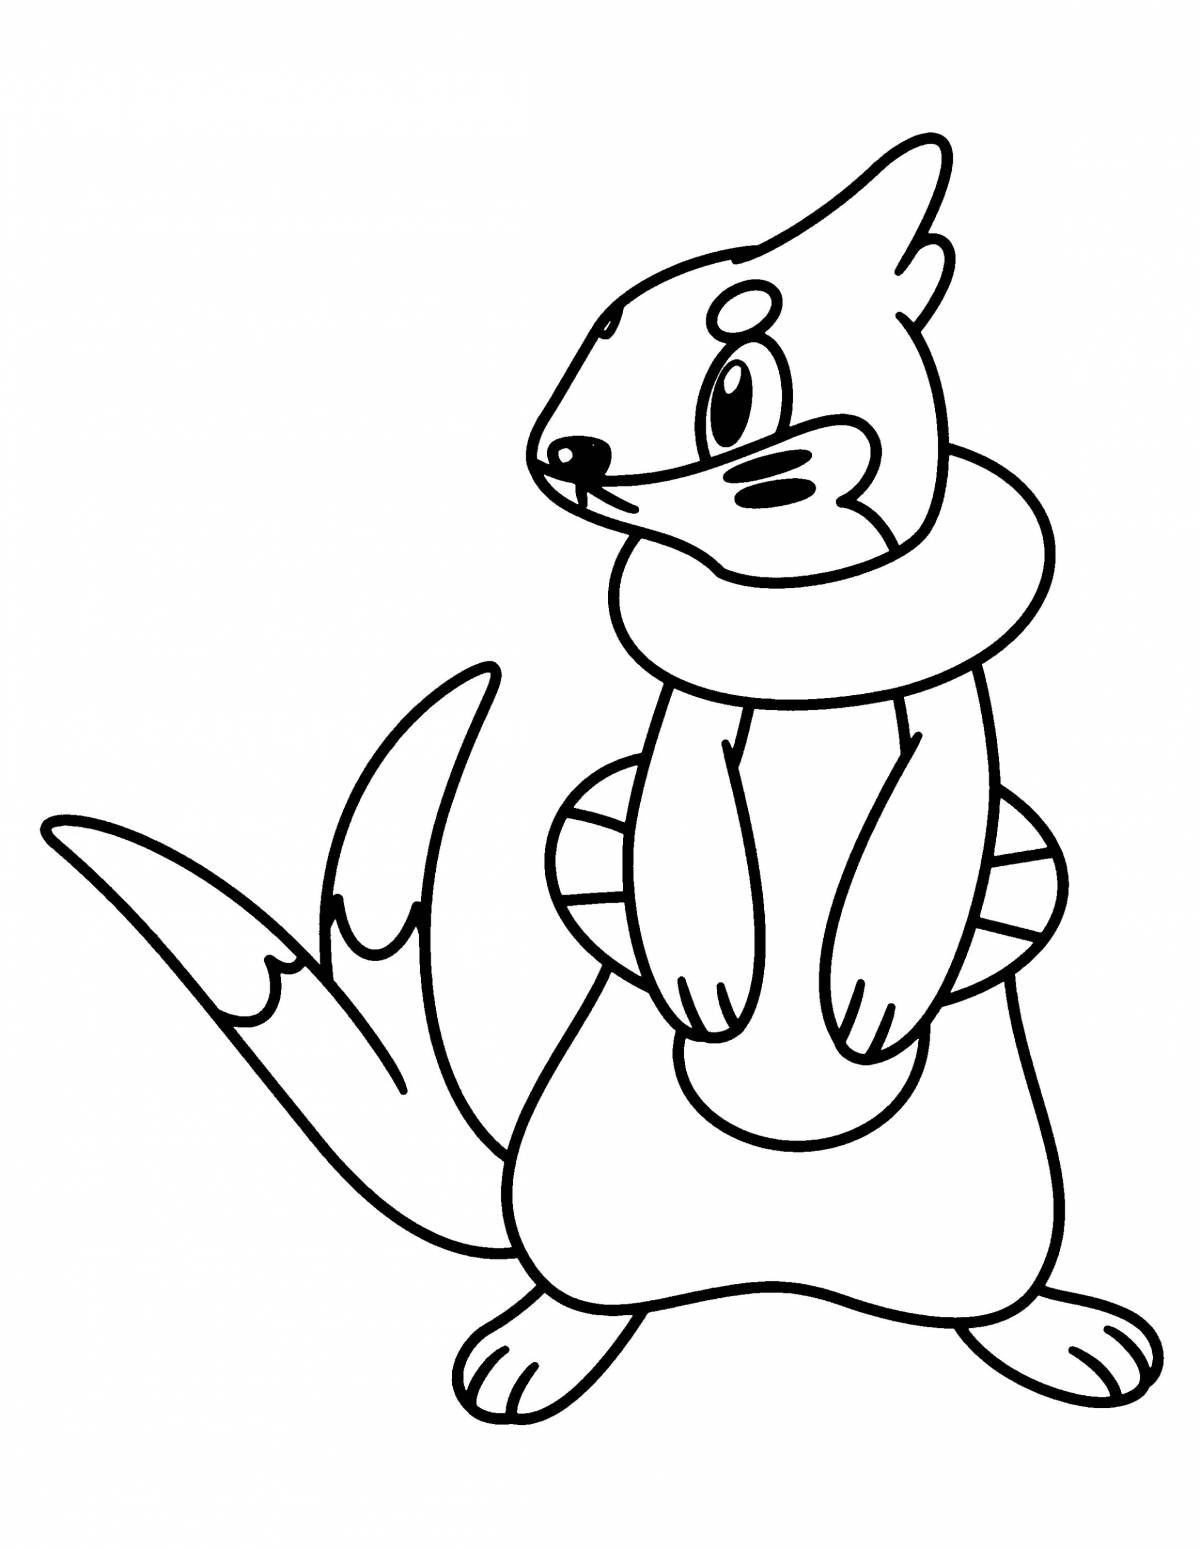 Dramatic pokemon coloring pages